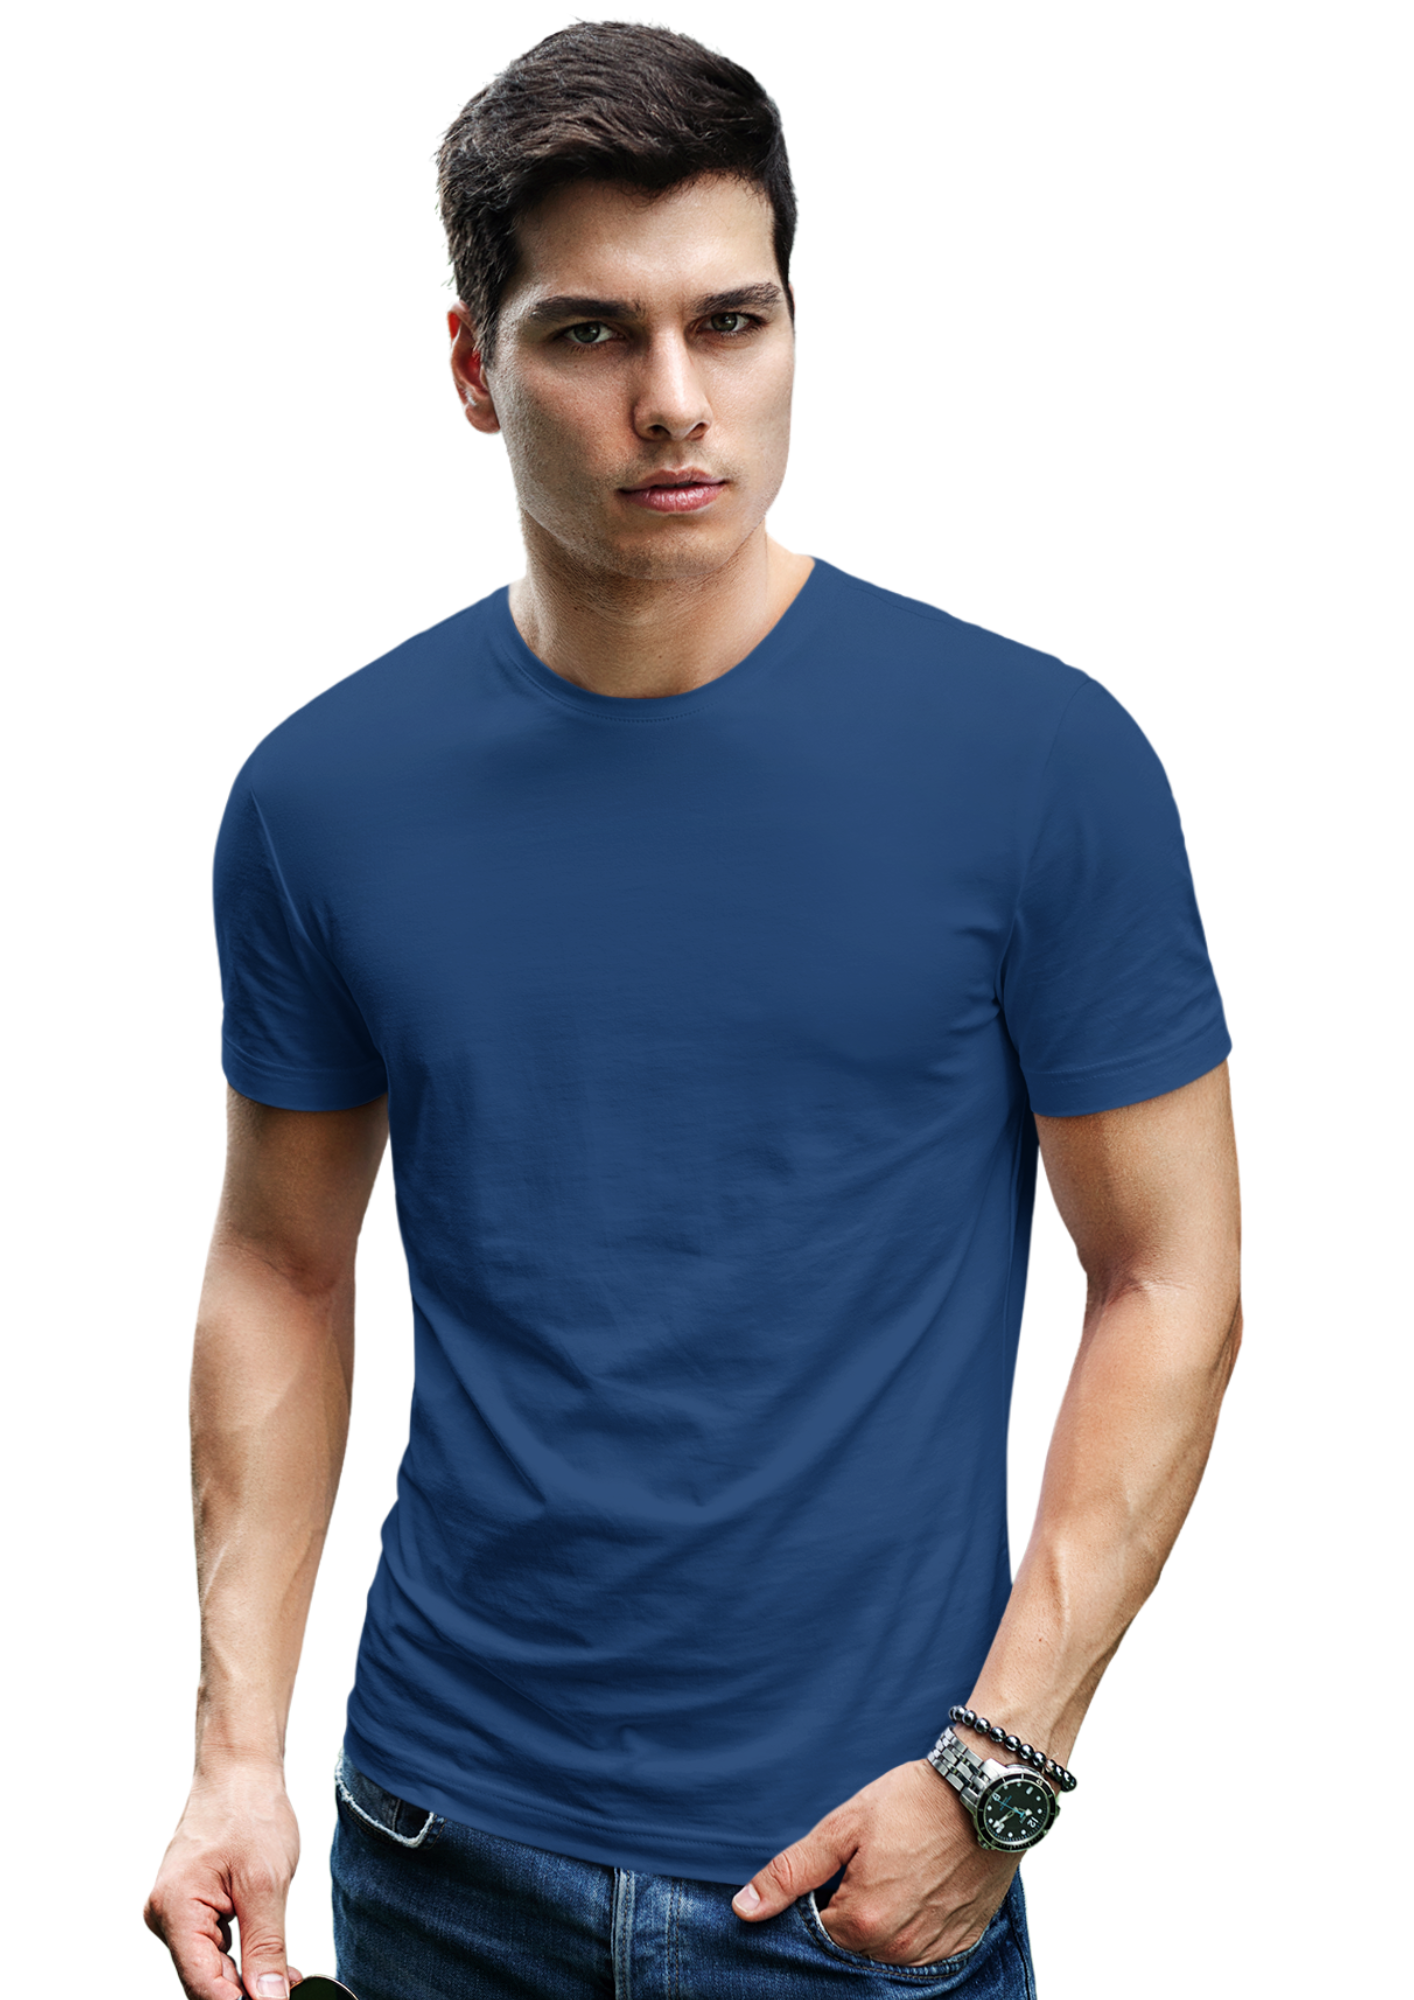 100% Compacted Combed Cotton White, Navy, Pine 3 T-shirts